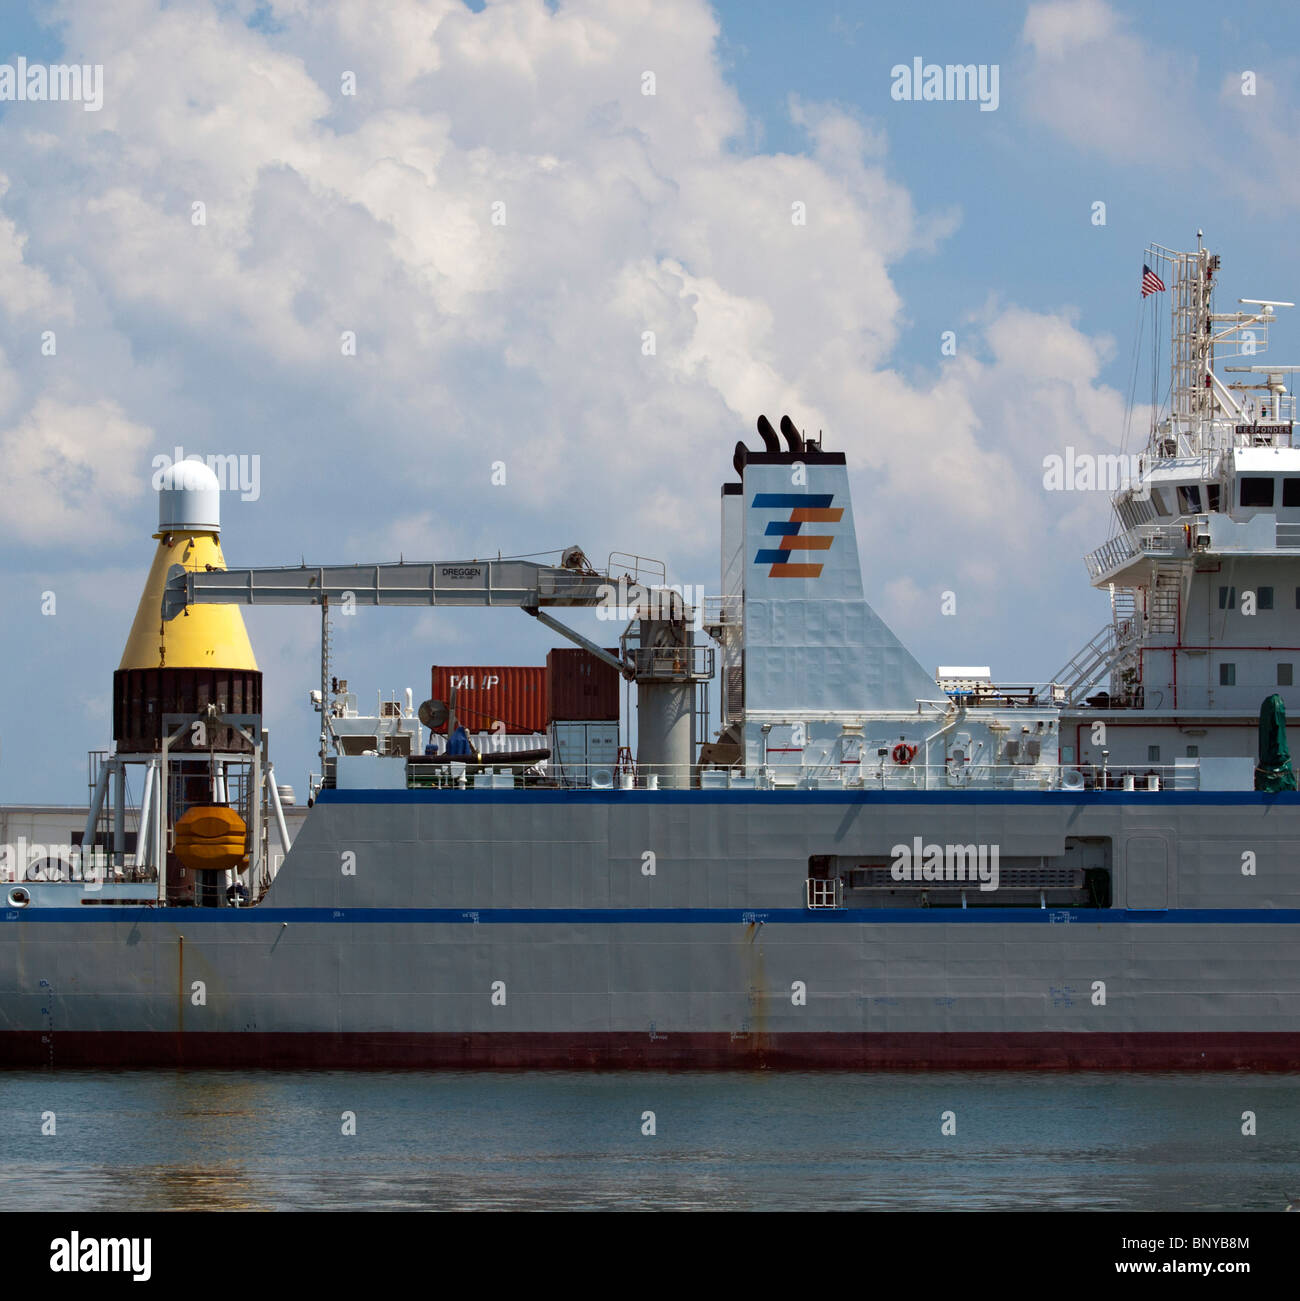 Tyco Responder -  Reliance class transoceanic cable laying ship at Port Canaveral in Florida USA Stock Photo